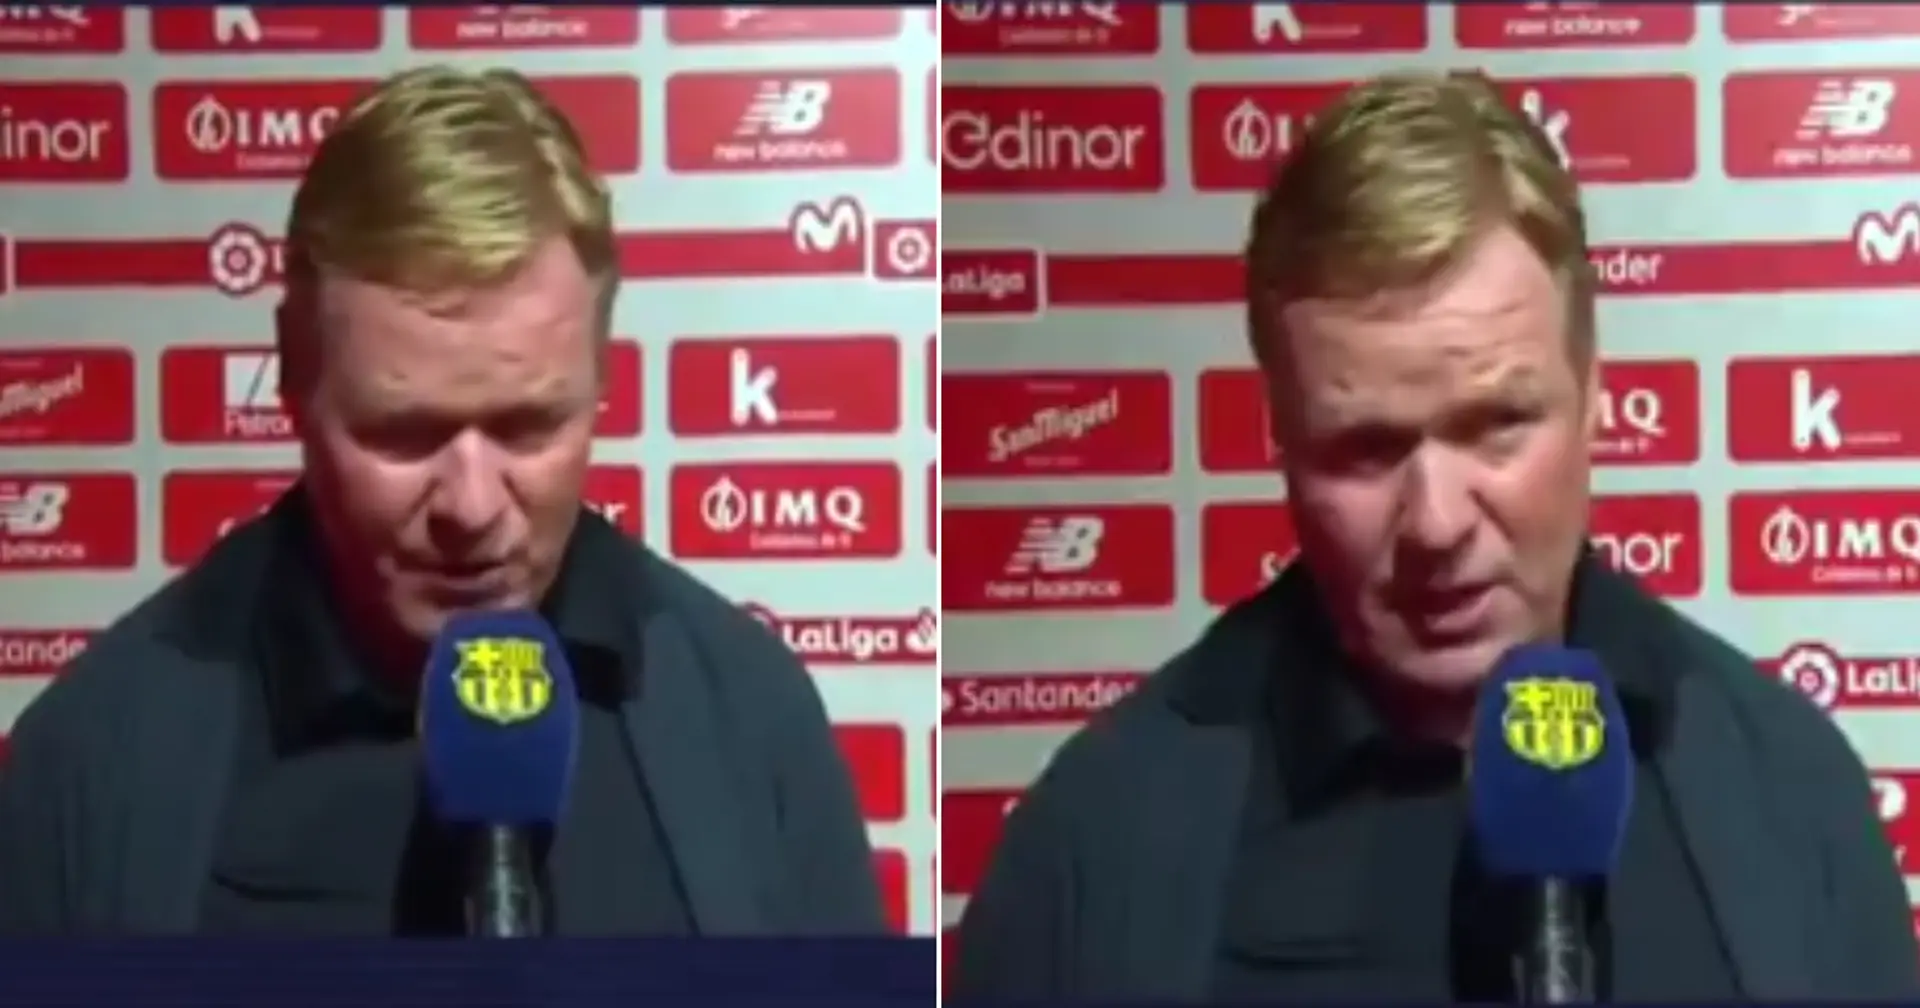 'The draw is fair': Ronald Koeman not disappointed with his team after Bilbao draw